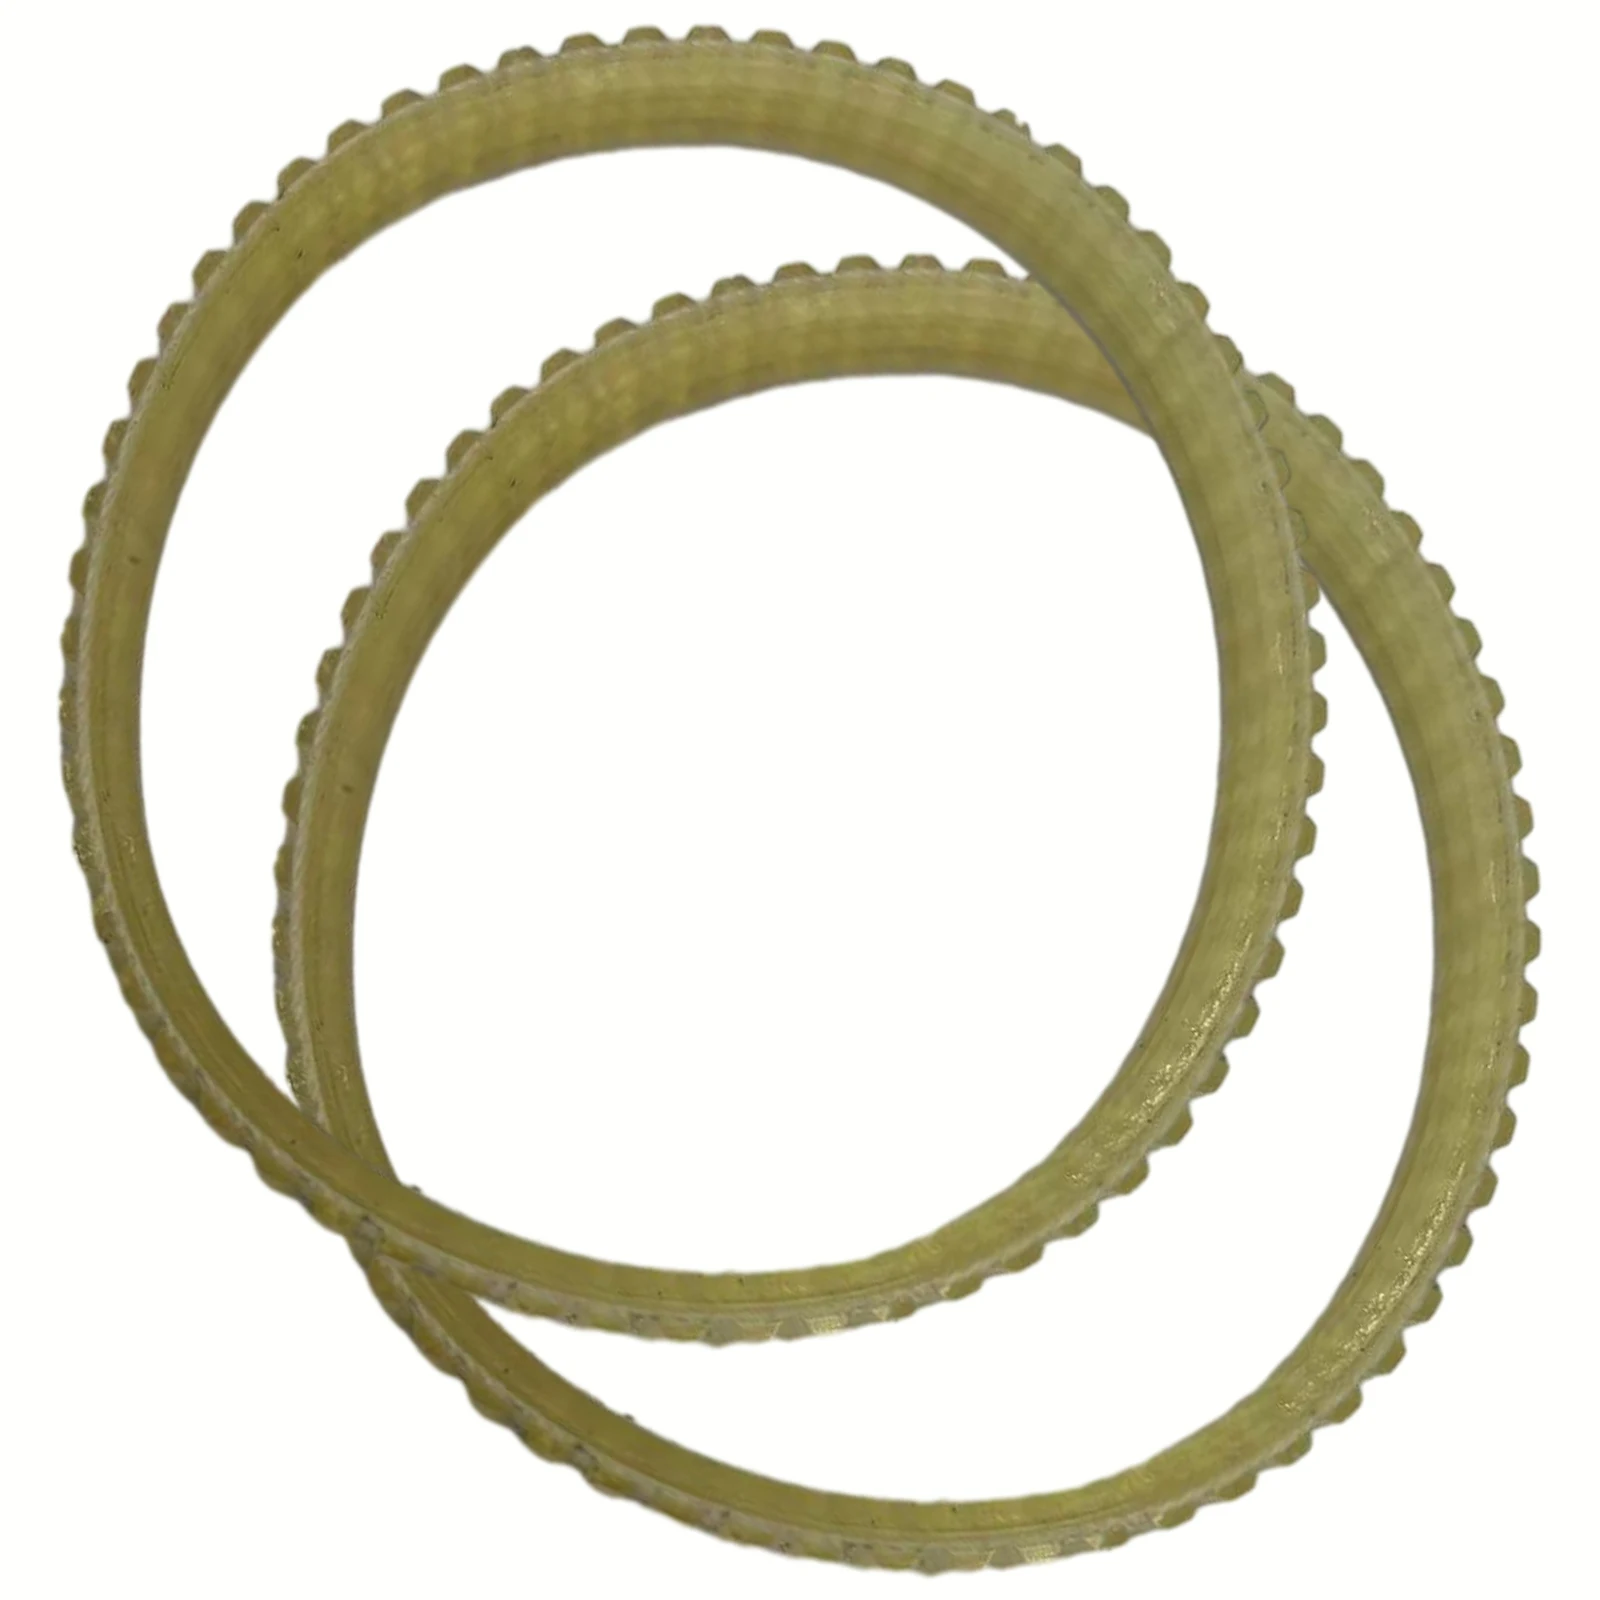 

Drive Belt Oil Ring Seal 2pcs/set For 9045 Sander Outer Girth 250mm Power Tools Random Color Rubber Useful Brand New